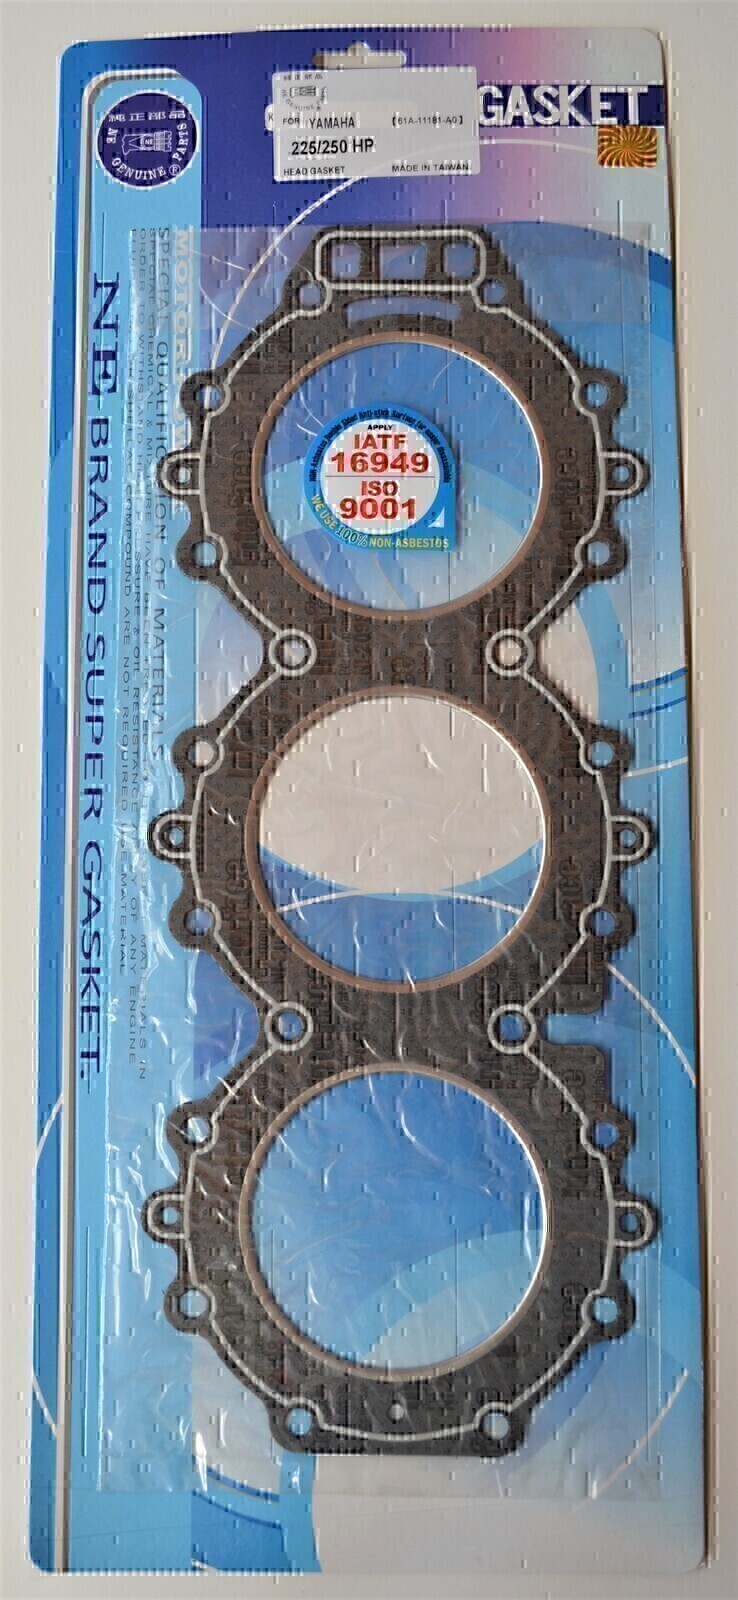 HEAD GASKET FOR YAMAHA 225HP - 250HP 76 DEGREE OUTBOARD MOTOR # 61A-11181-A0